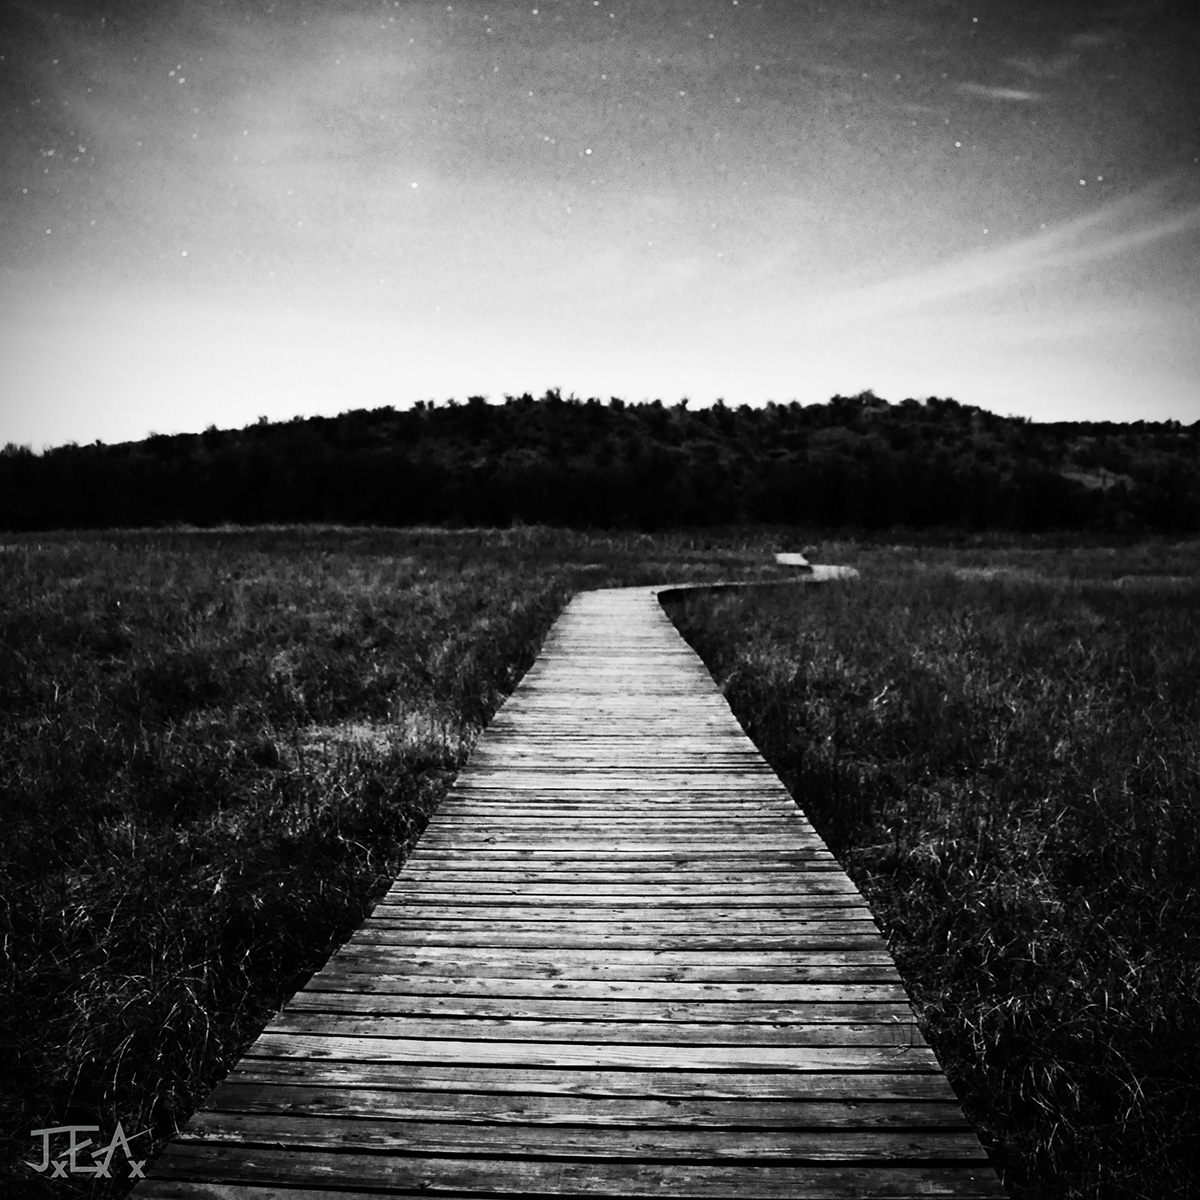 A square format black and white image of a boardwalk in a wildlife refuge at night with starry skies.